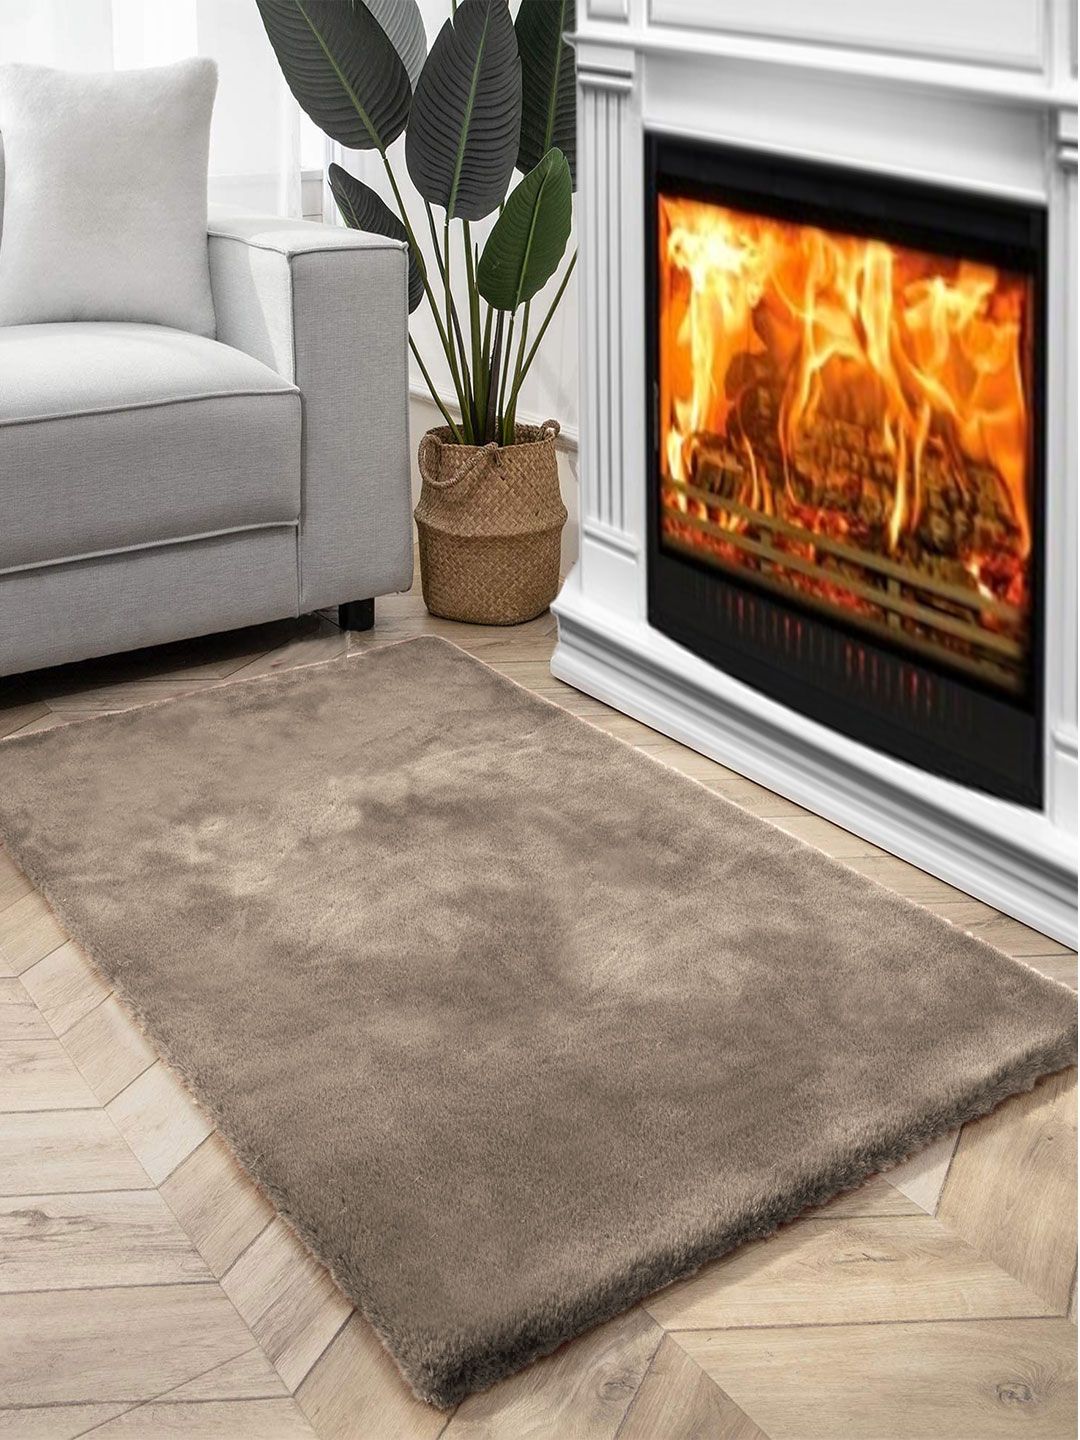 FI Taupe Polycotton Solid Bath Rugs Price in India